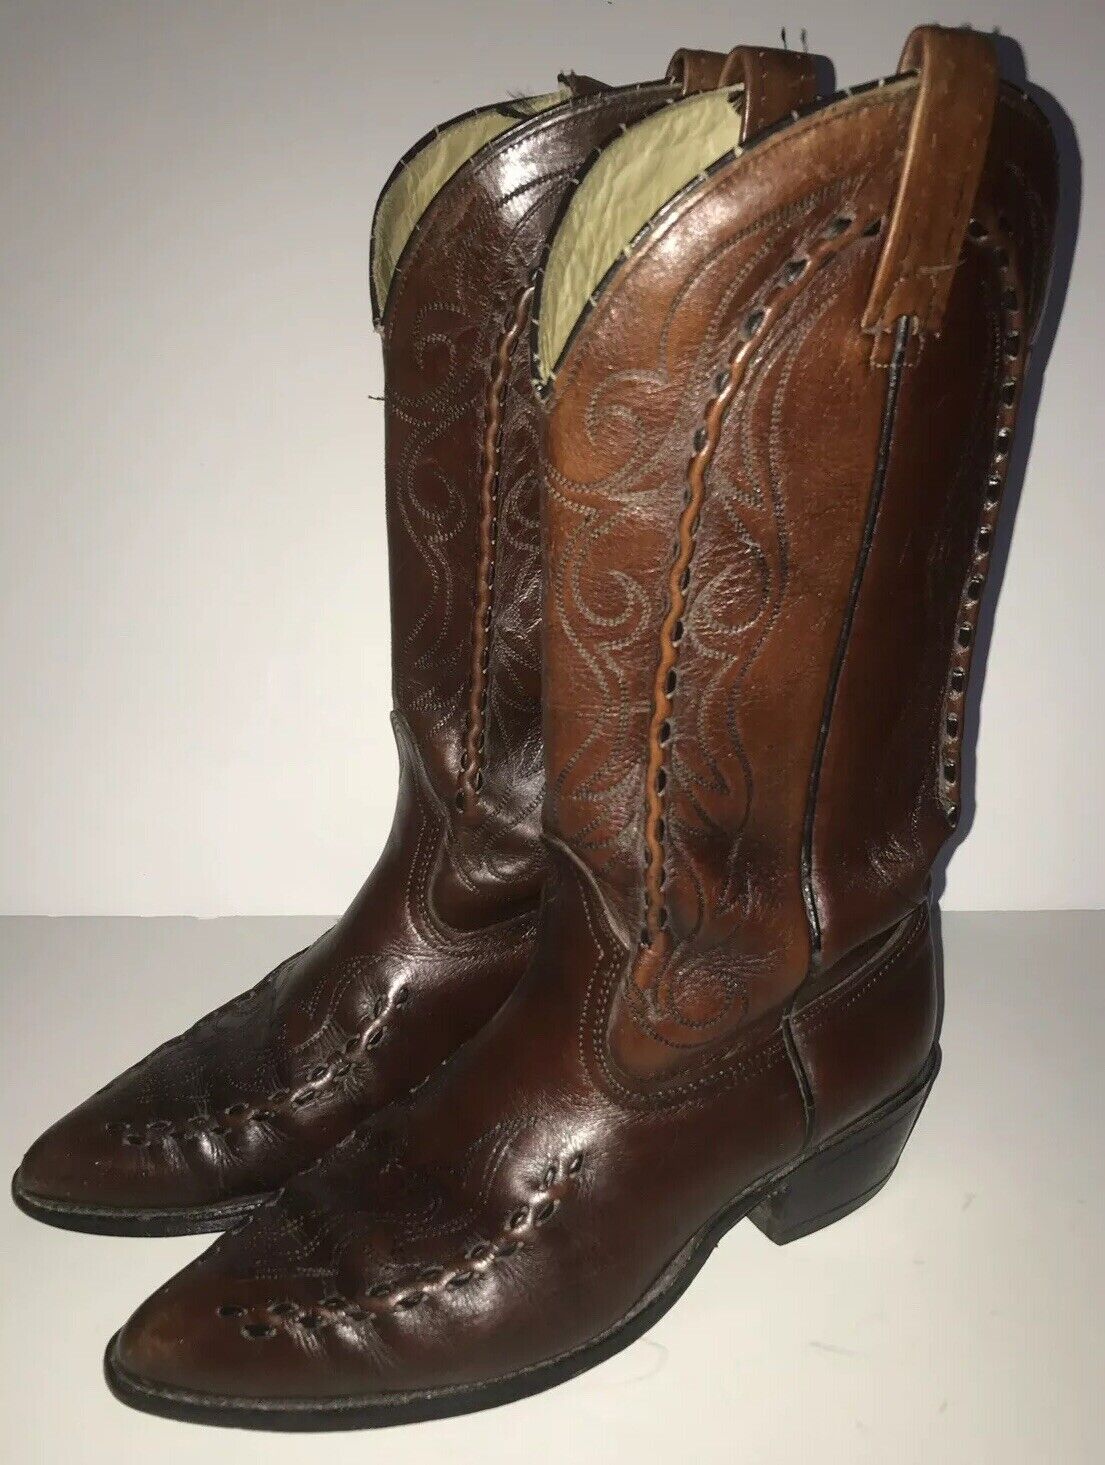 Vintage Rockabilly 1950s Acme Needle Toe Bucklace Whipstitch Cowboy Boots 8d